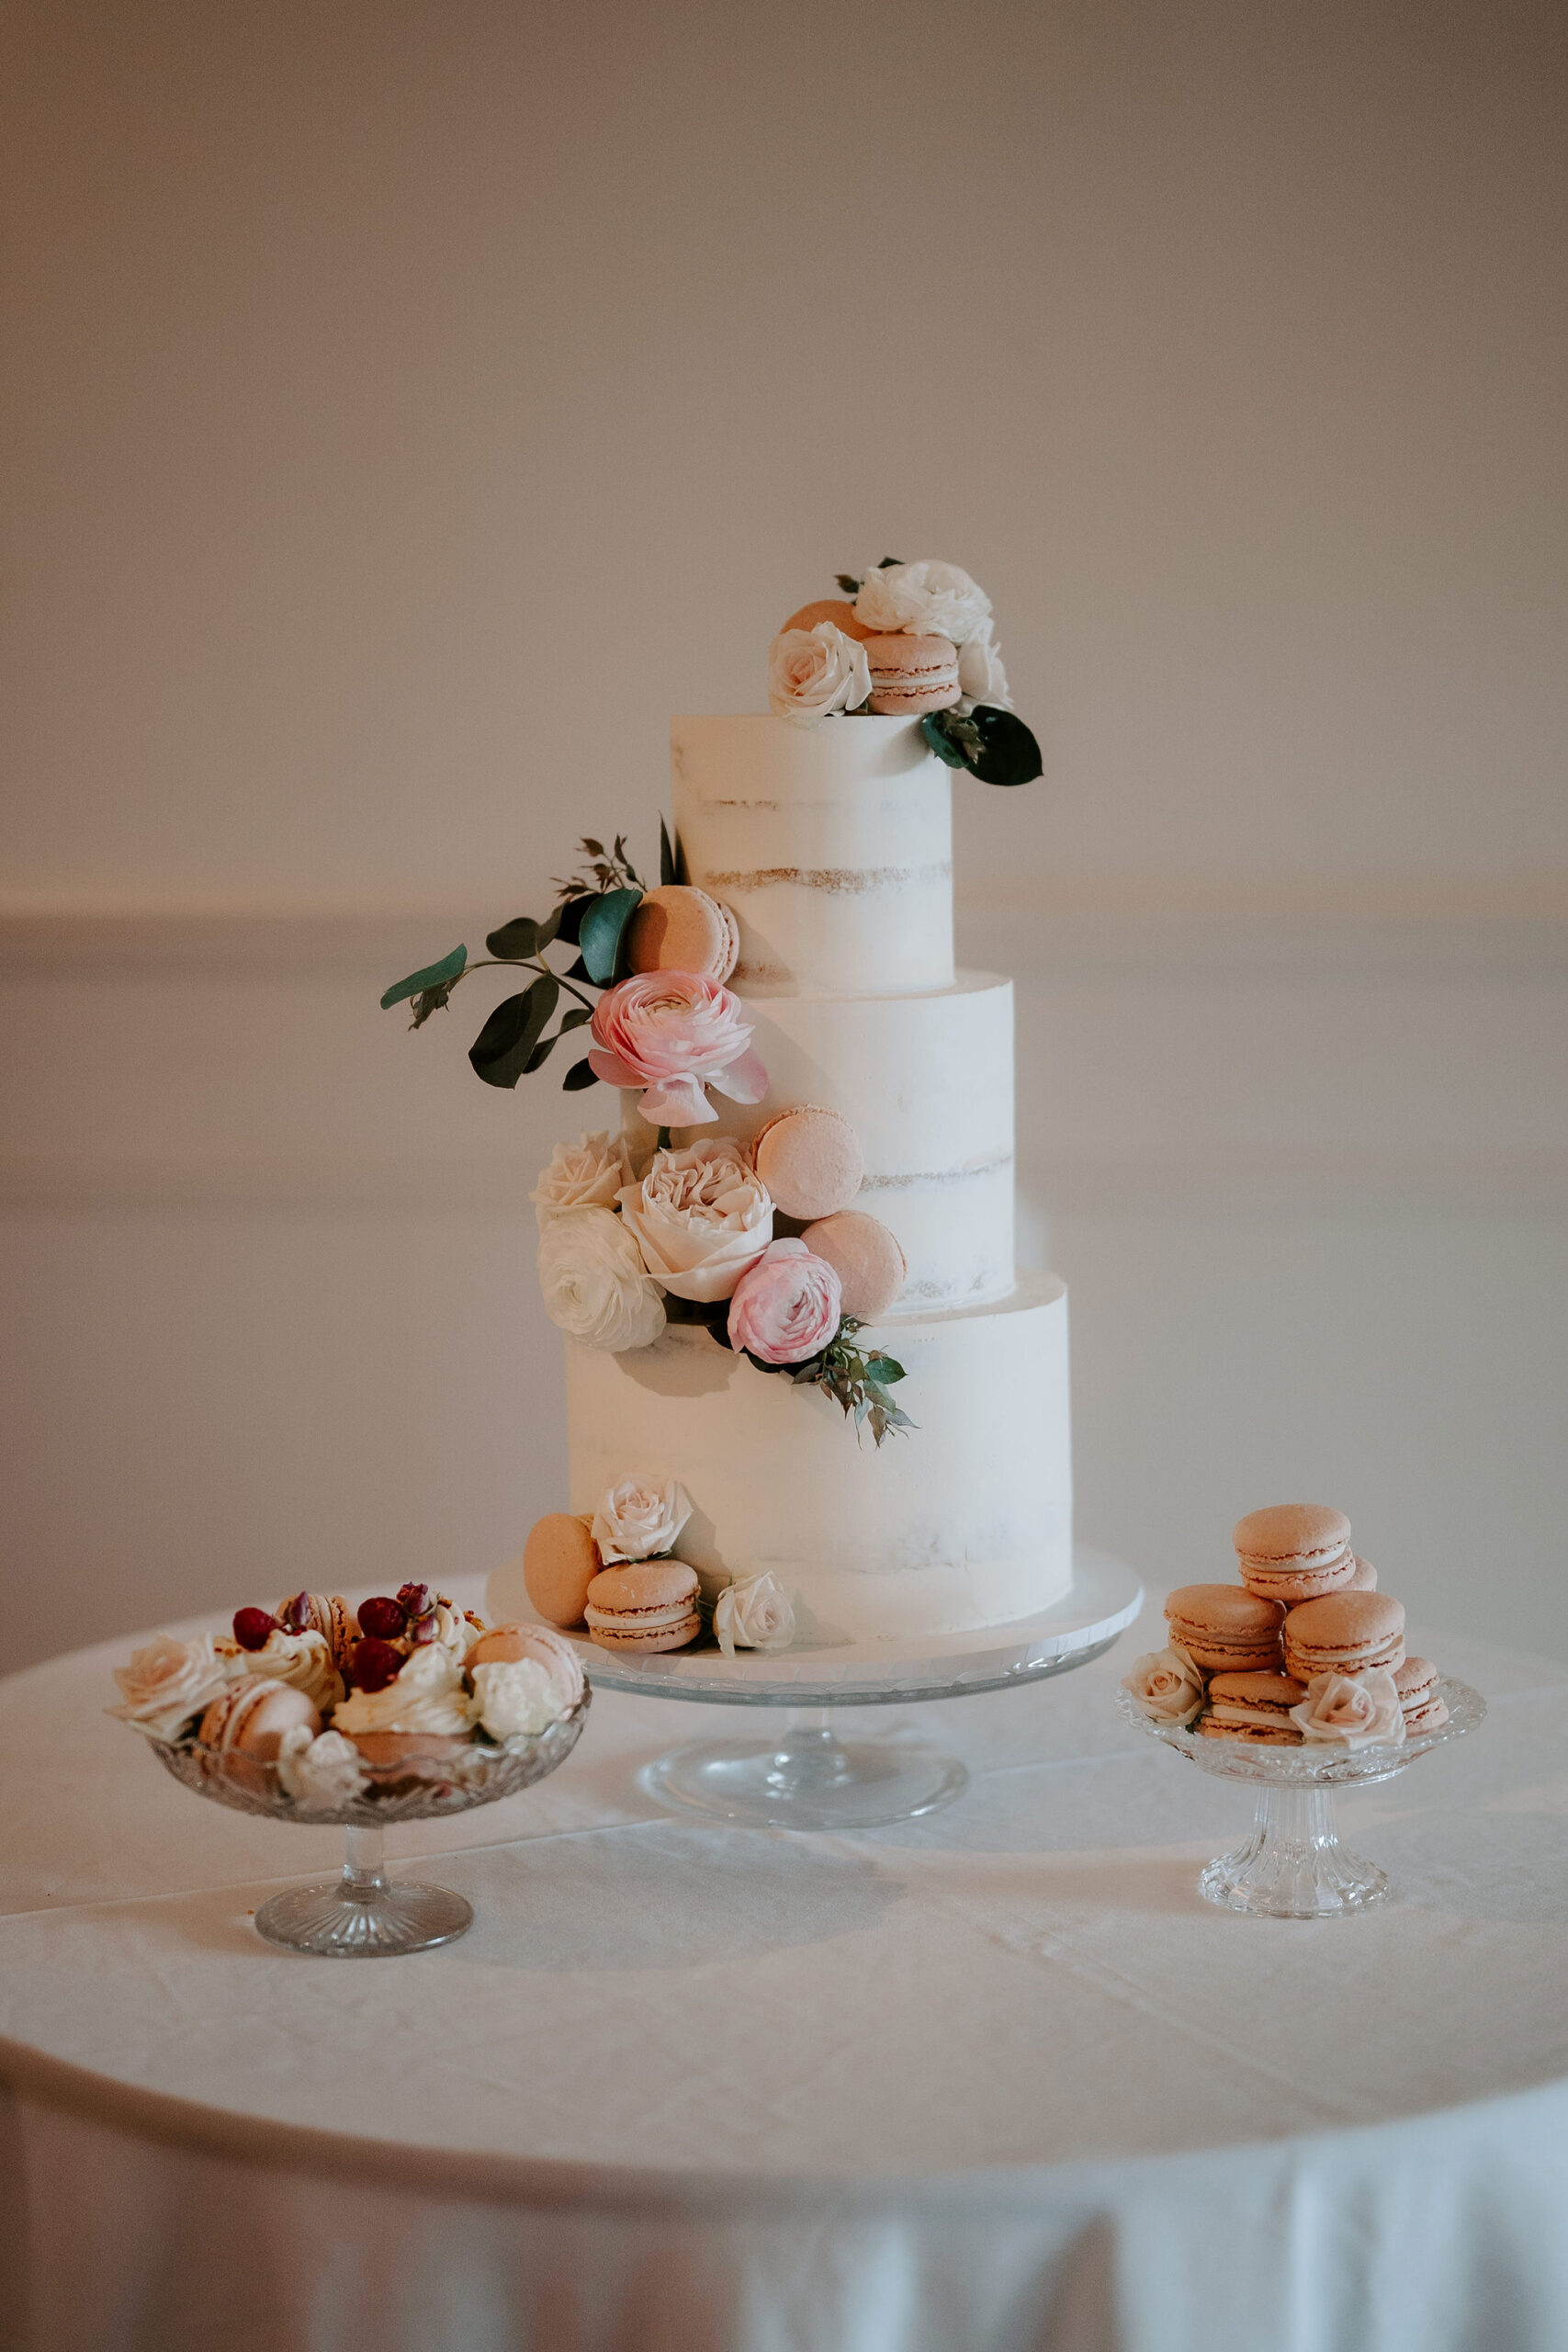 A three tiered white wedding cake festooned in roses and macarons sits on a white tablecloth with small bon bon dishes pilled with macarons